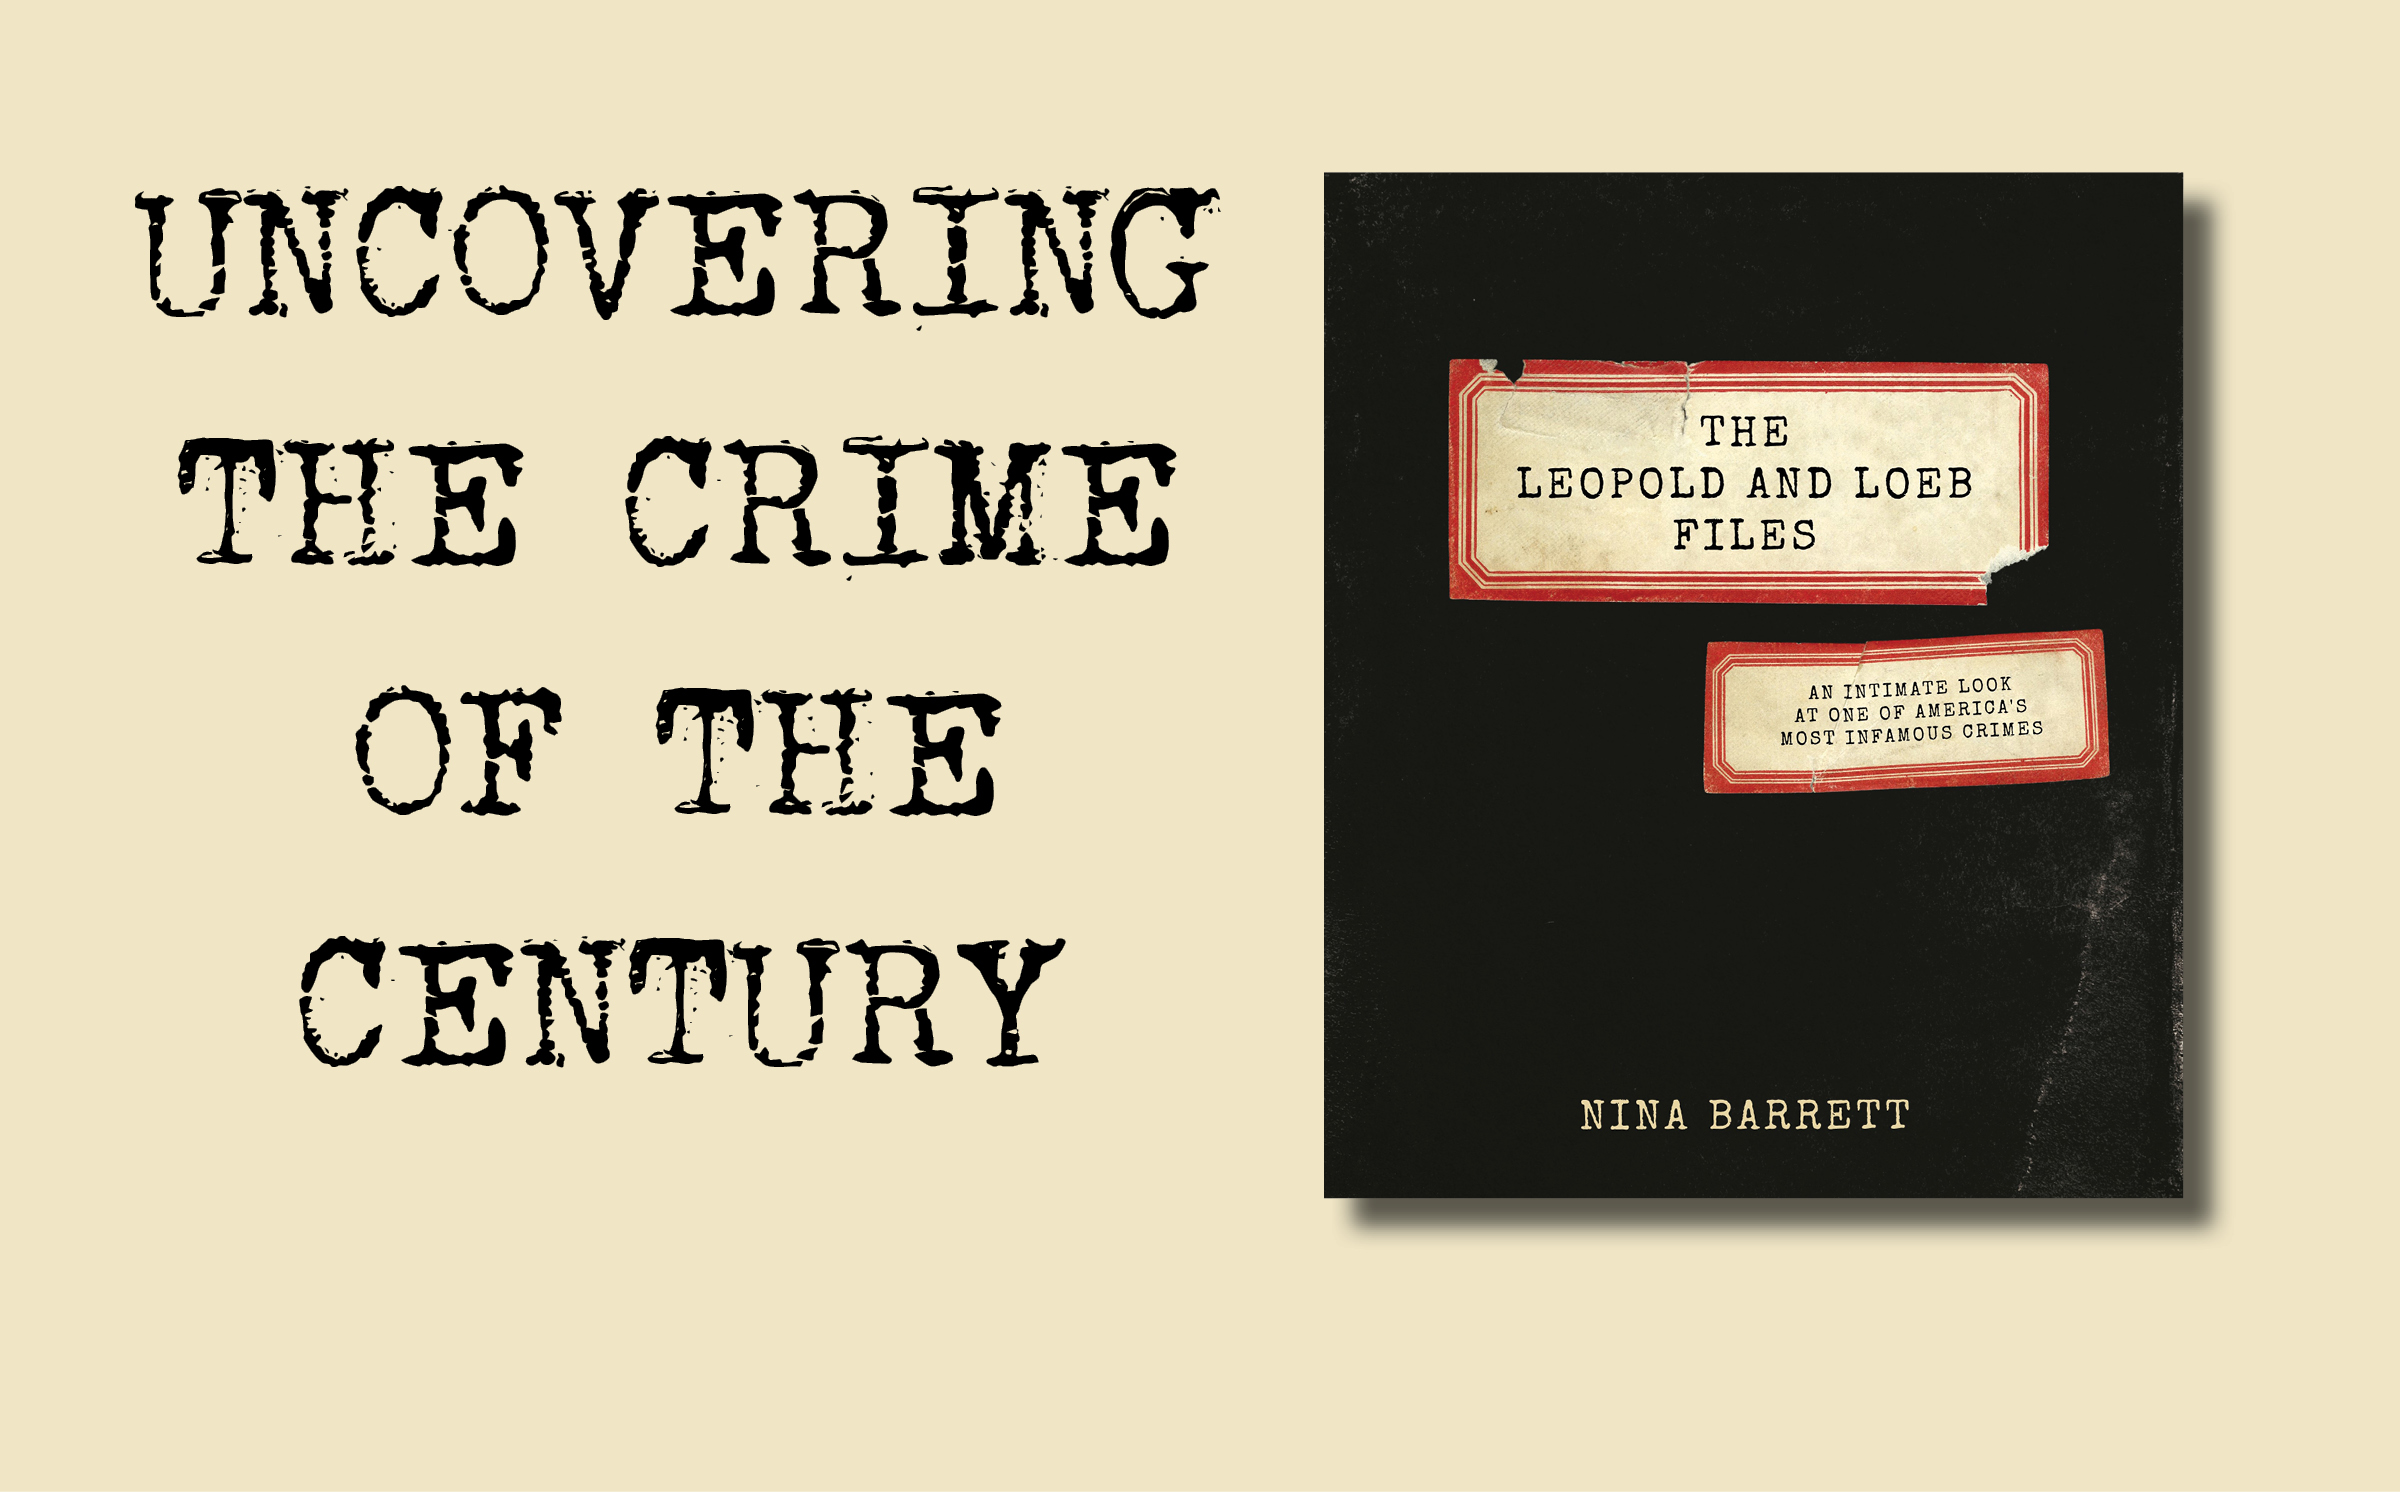 Focus On The Book: The Leopold and Loeb Files by Nina Barrett